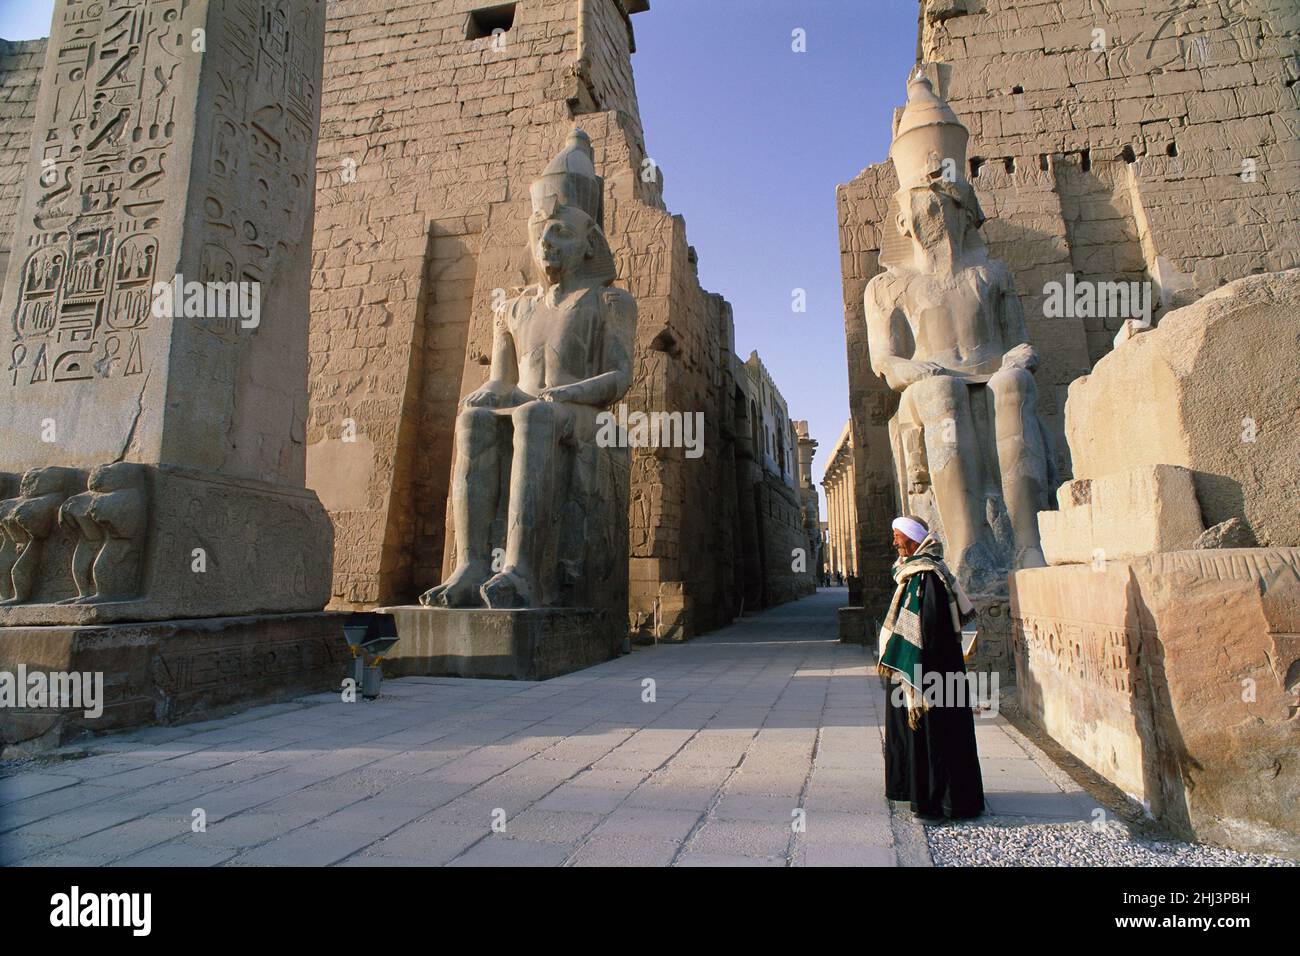 Egyptian man standing at the entrance to the Temple of Luxor, Luxor, Egypt Stock Photo